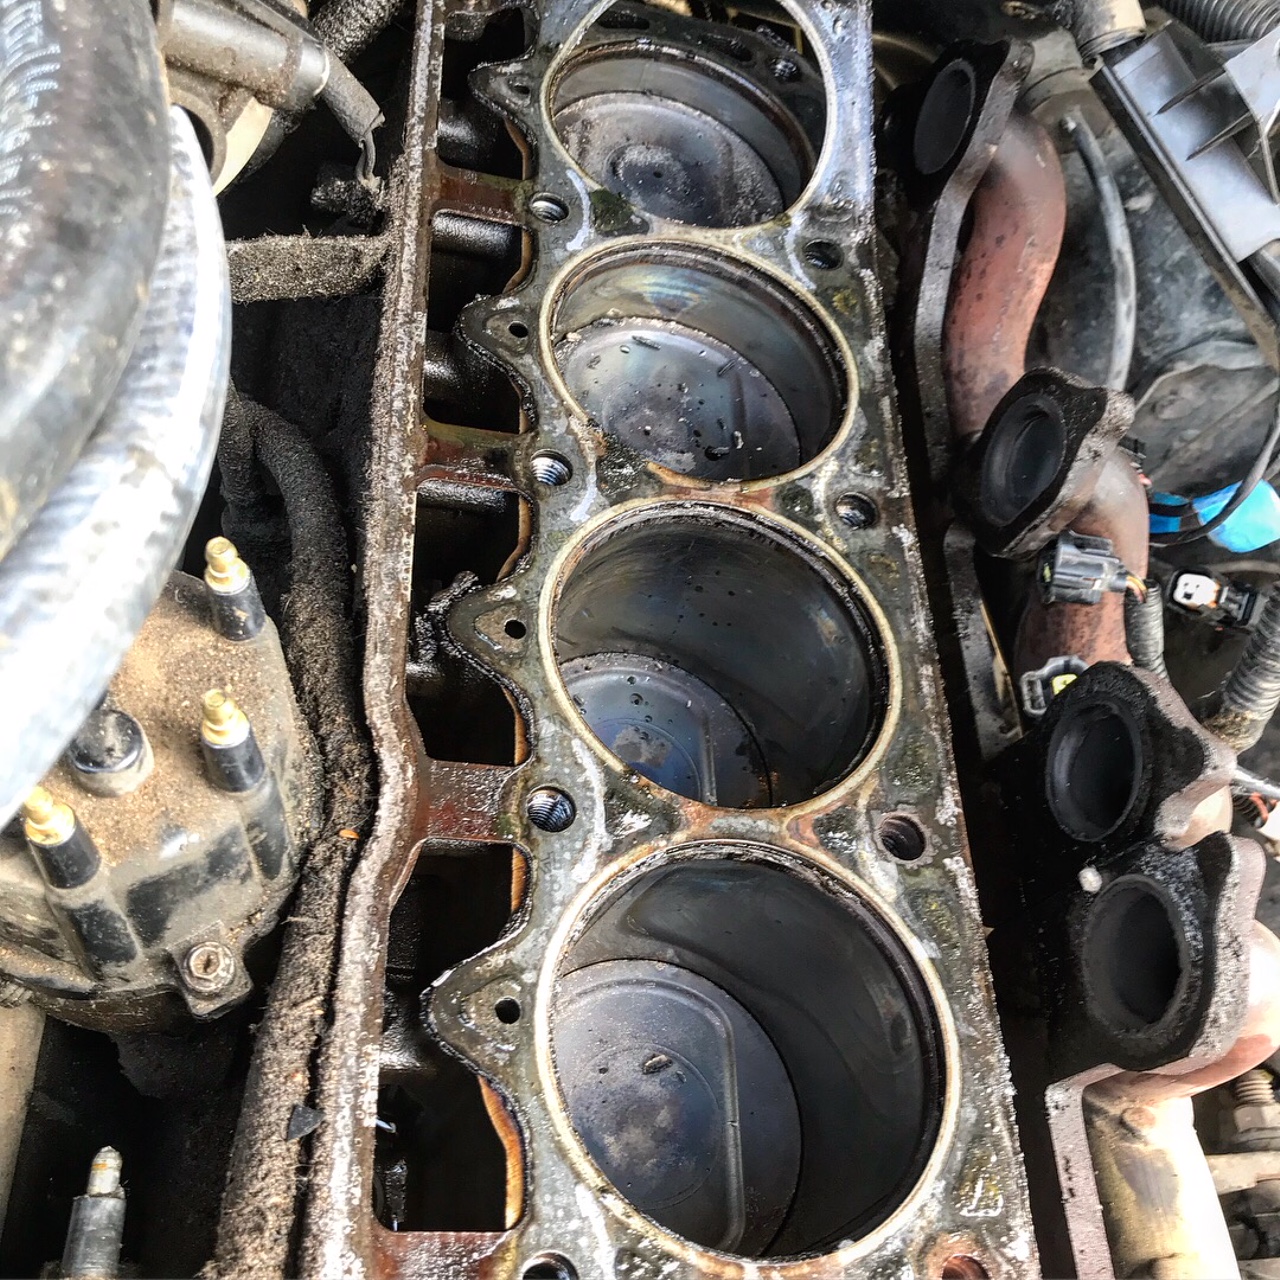 Project Cherokeeper: Blown Head Gasket! Time to Rebuild the Jeep 4.0 Engine  Top-End